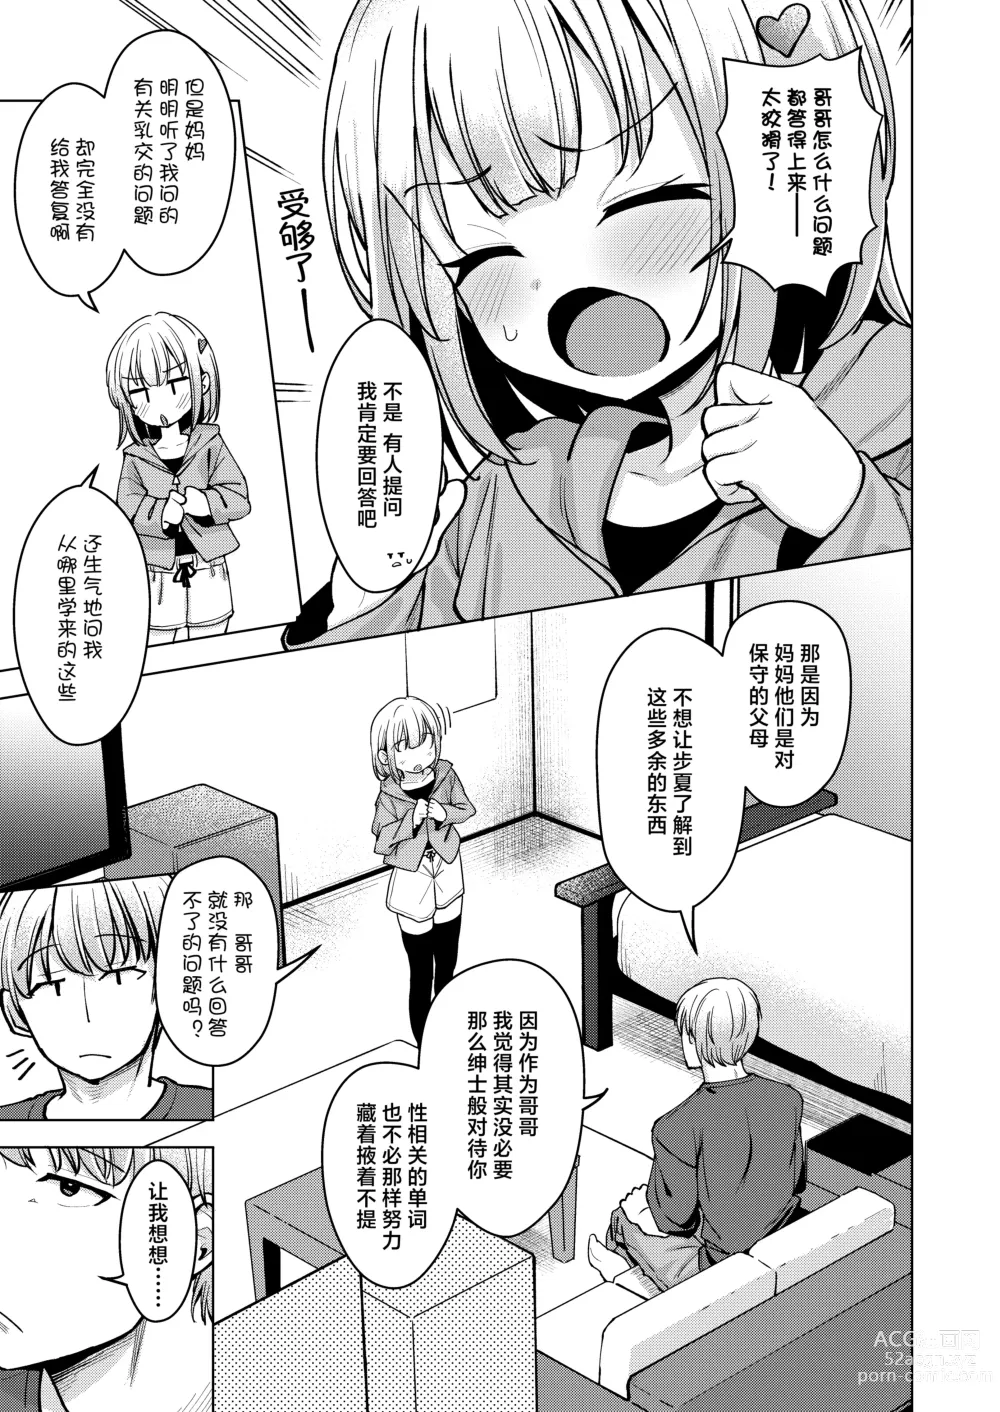 Page 5 of doujinshi 邪心妹妹真是太棒了